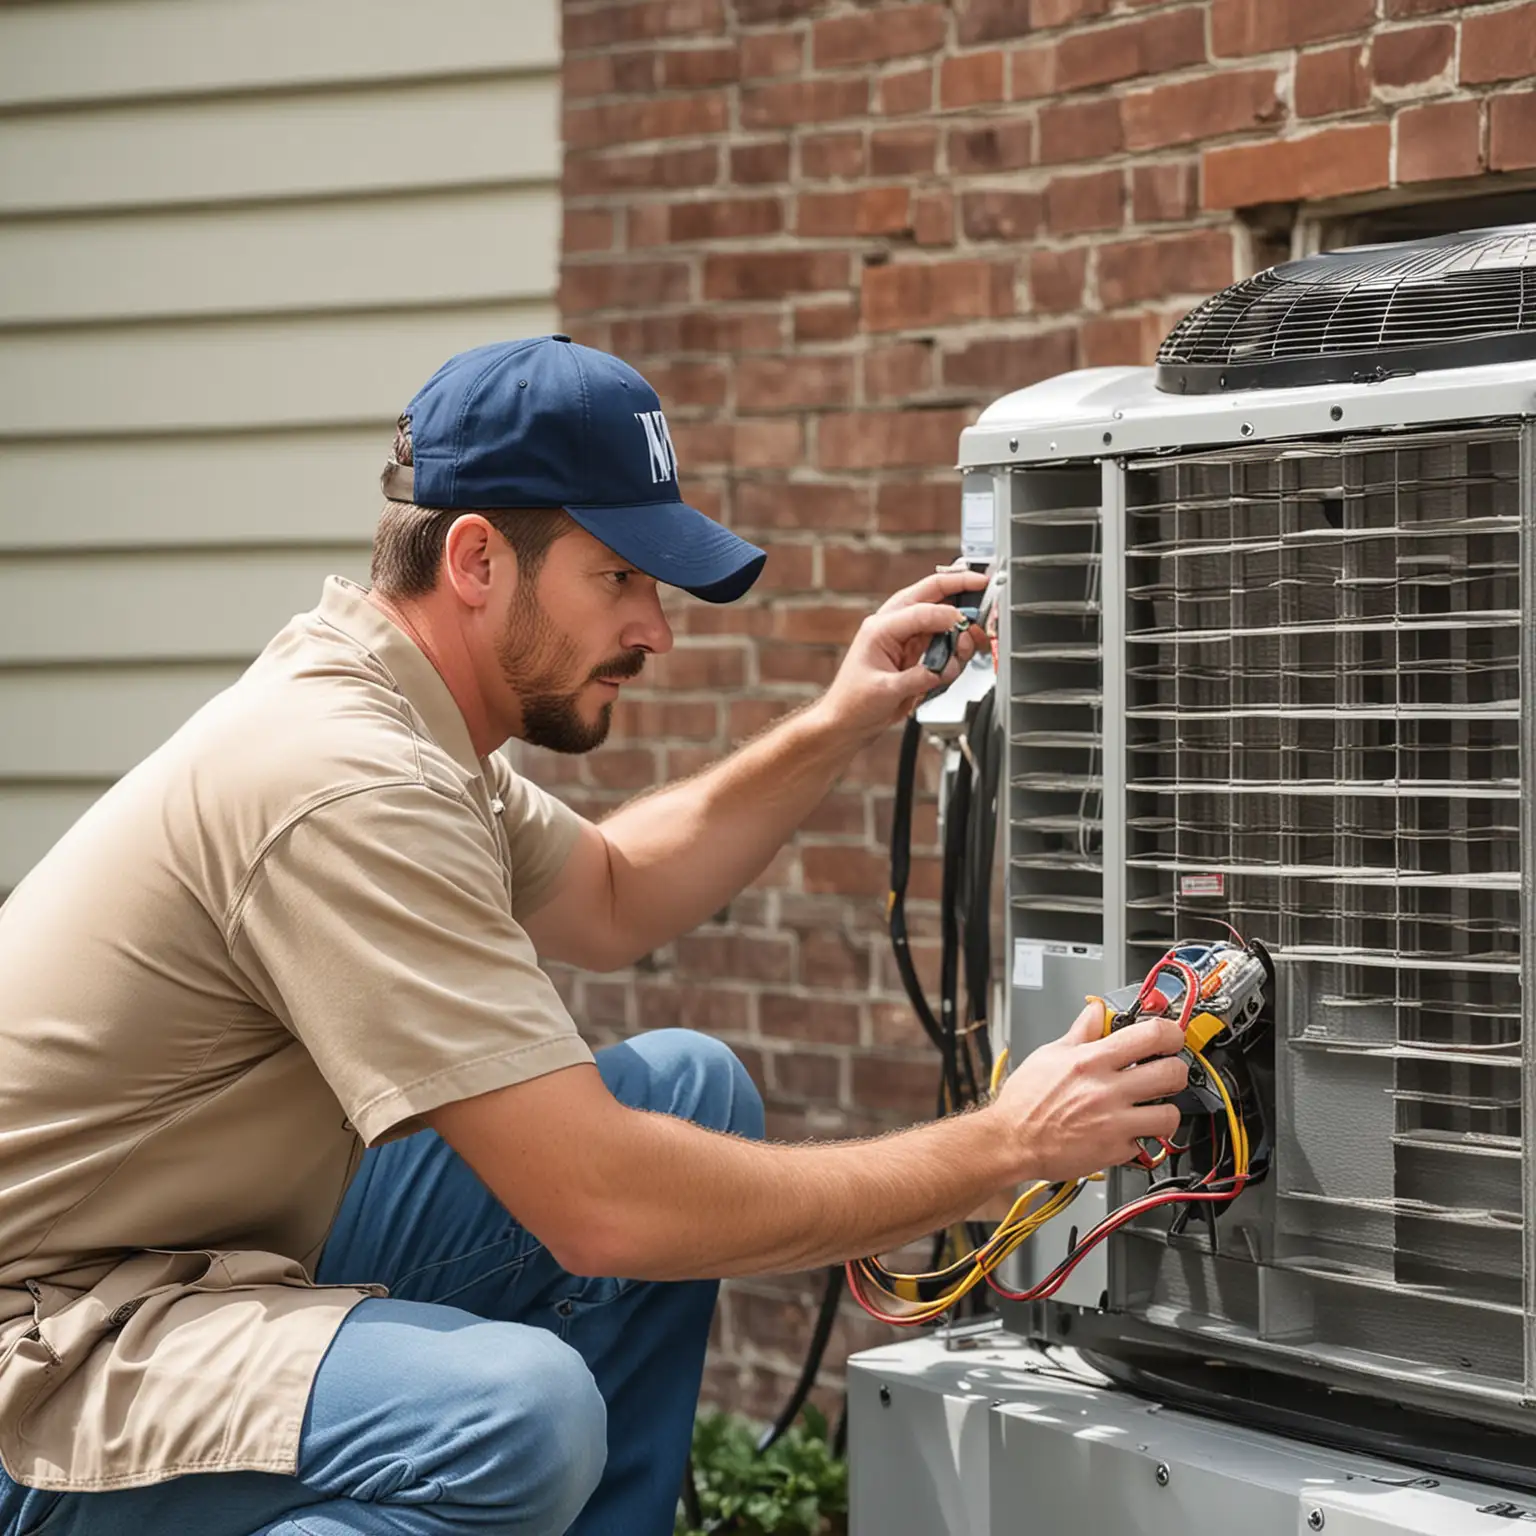 Create an image of a professional American hvac technician from north Georgia installing or working on an HVAC unit at a customers home. 